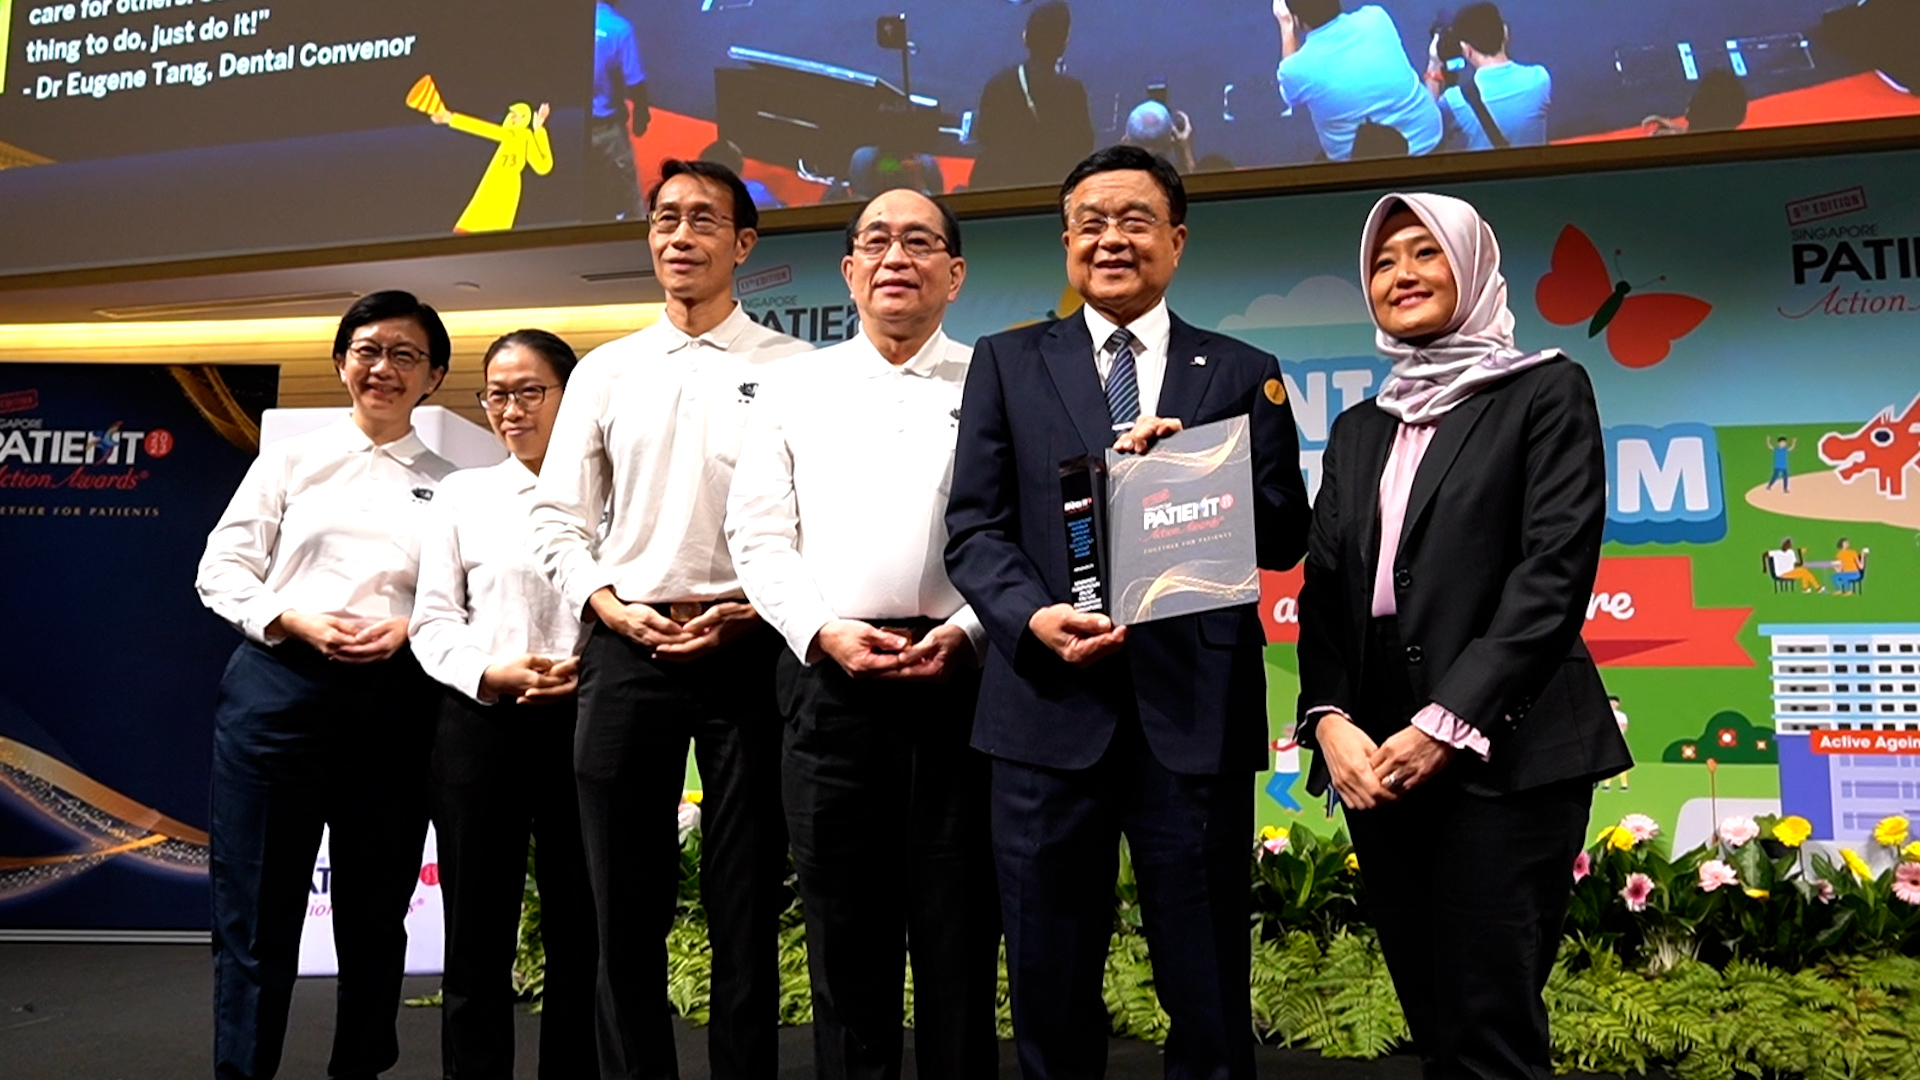 TIMA Singapore dental team receives recognition for its years of service